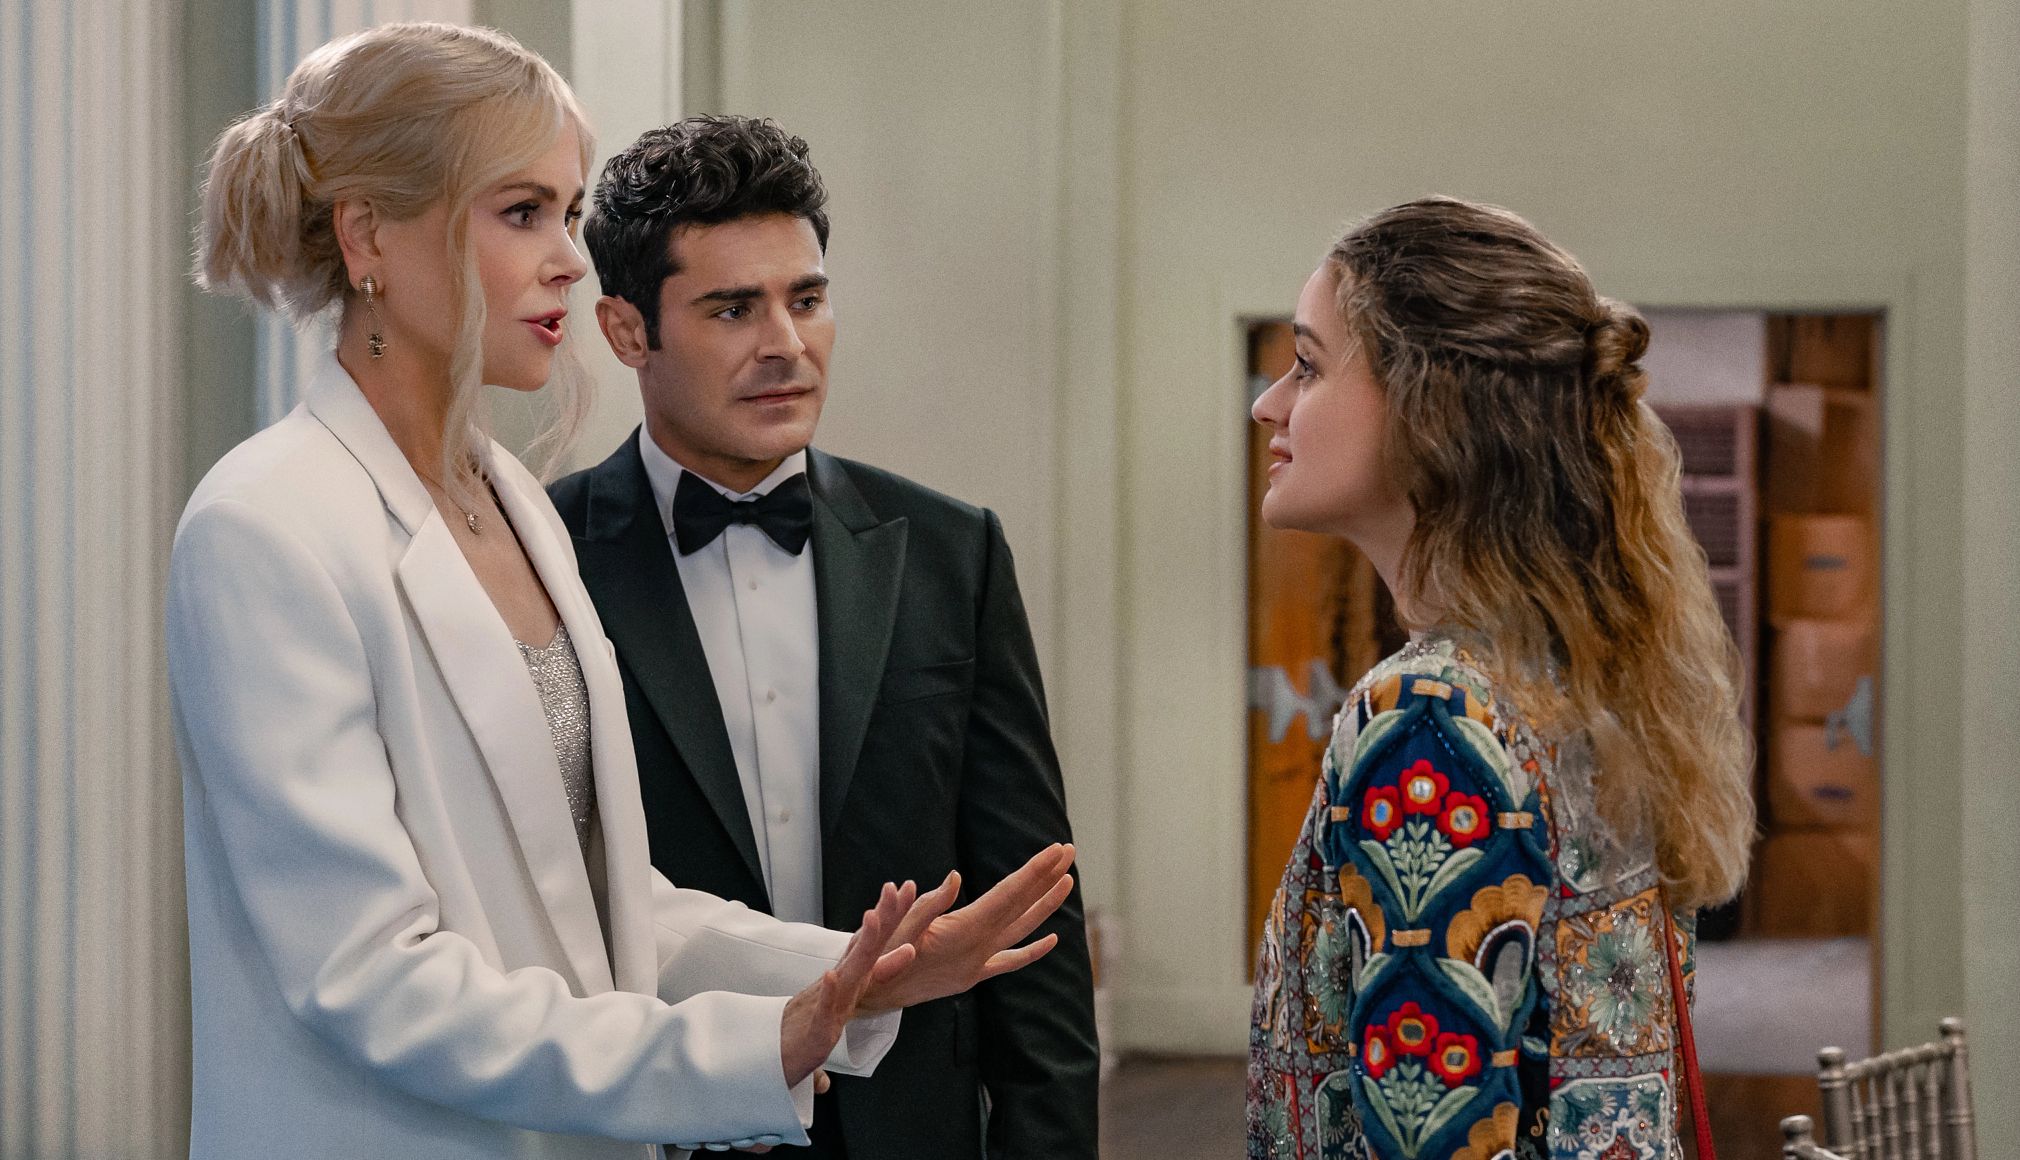 Nicole Kidman, Zac Efron and Joey King talking to each other in the Netflix movie A Family Affair